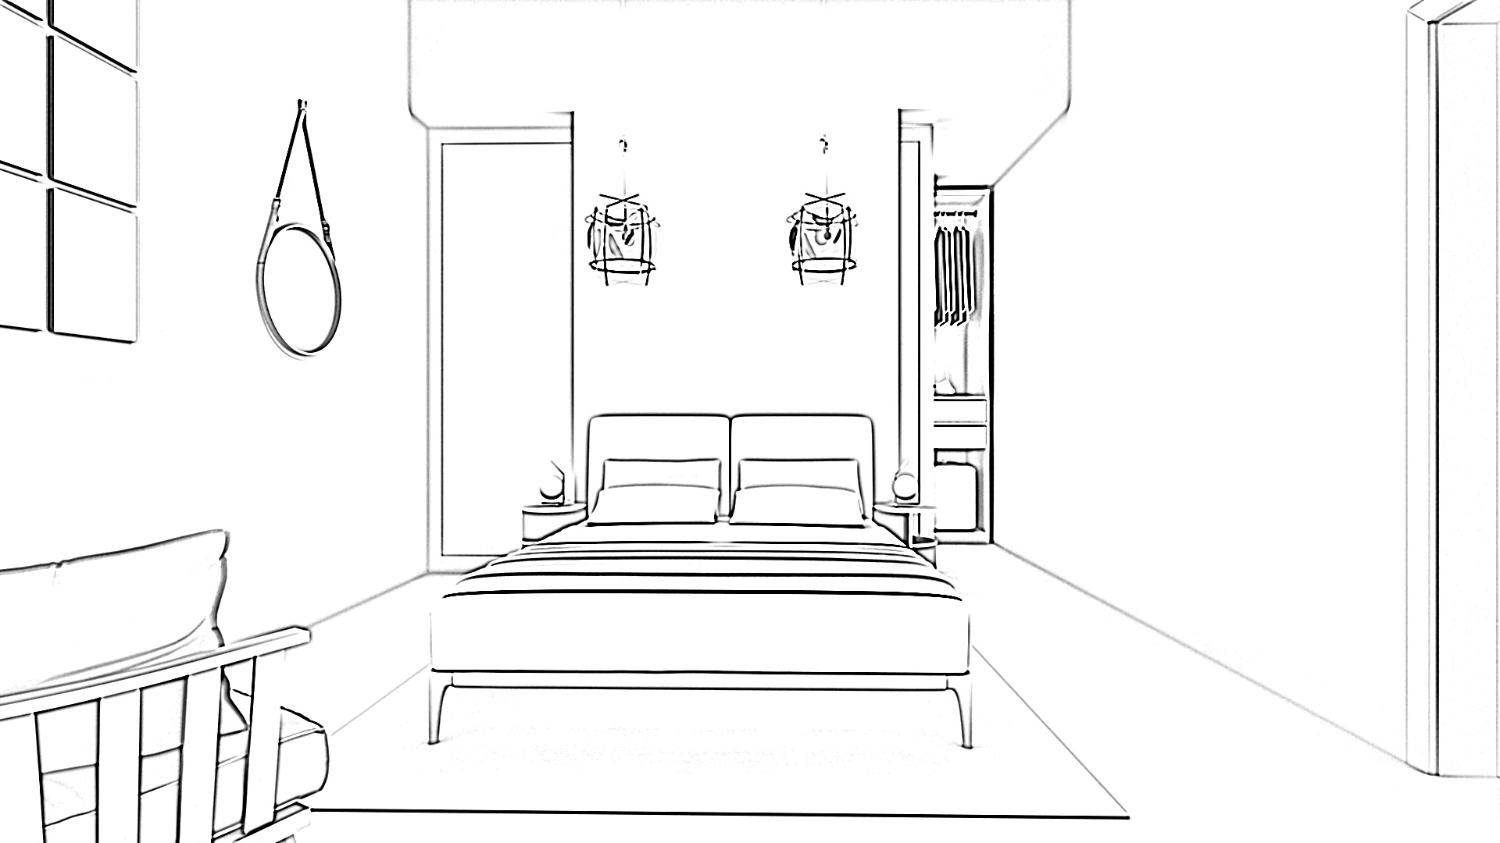 Sketch of a walk-in wardrobe for a bedroom, front view